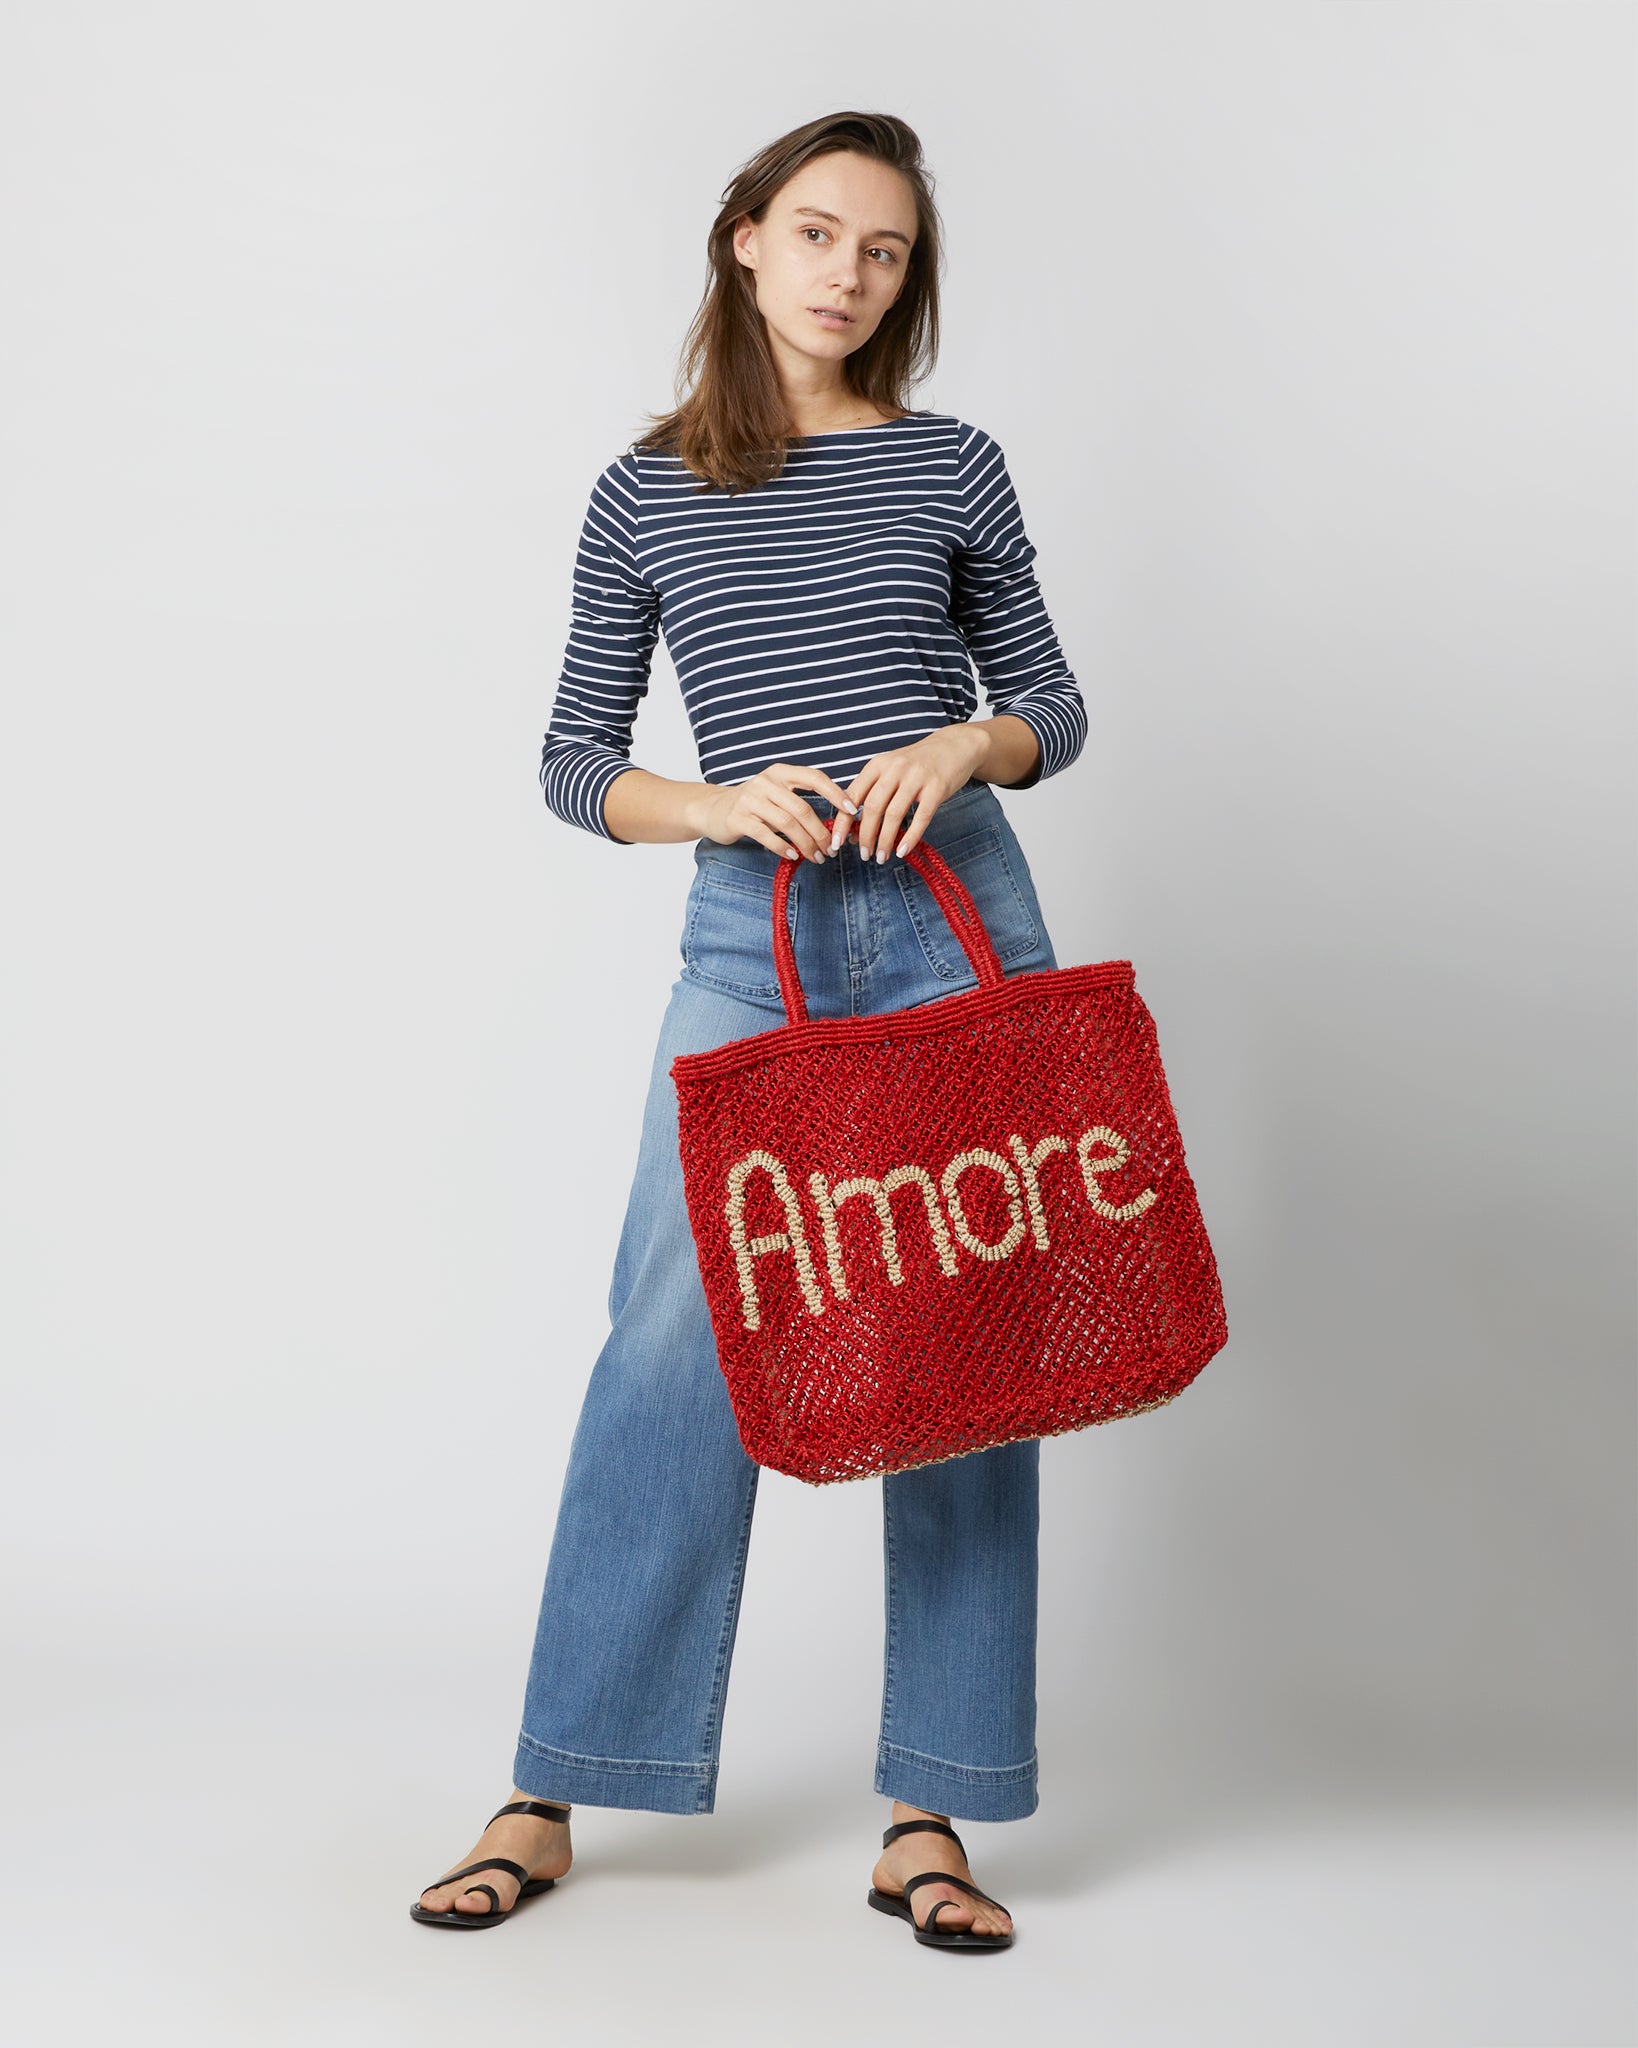 Amour Bag, from The Jacksons